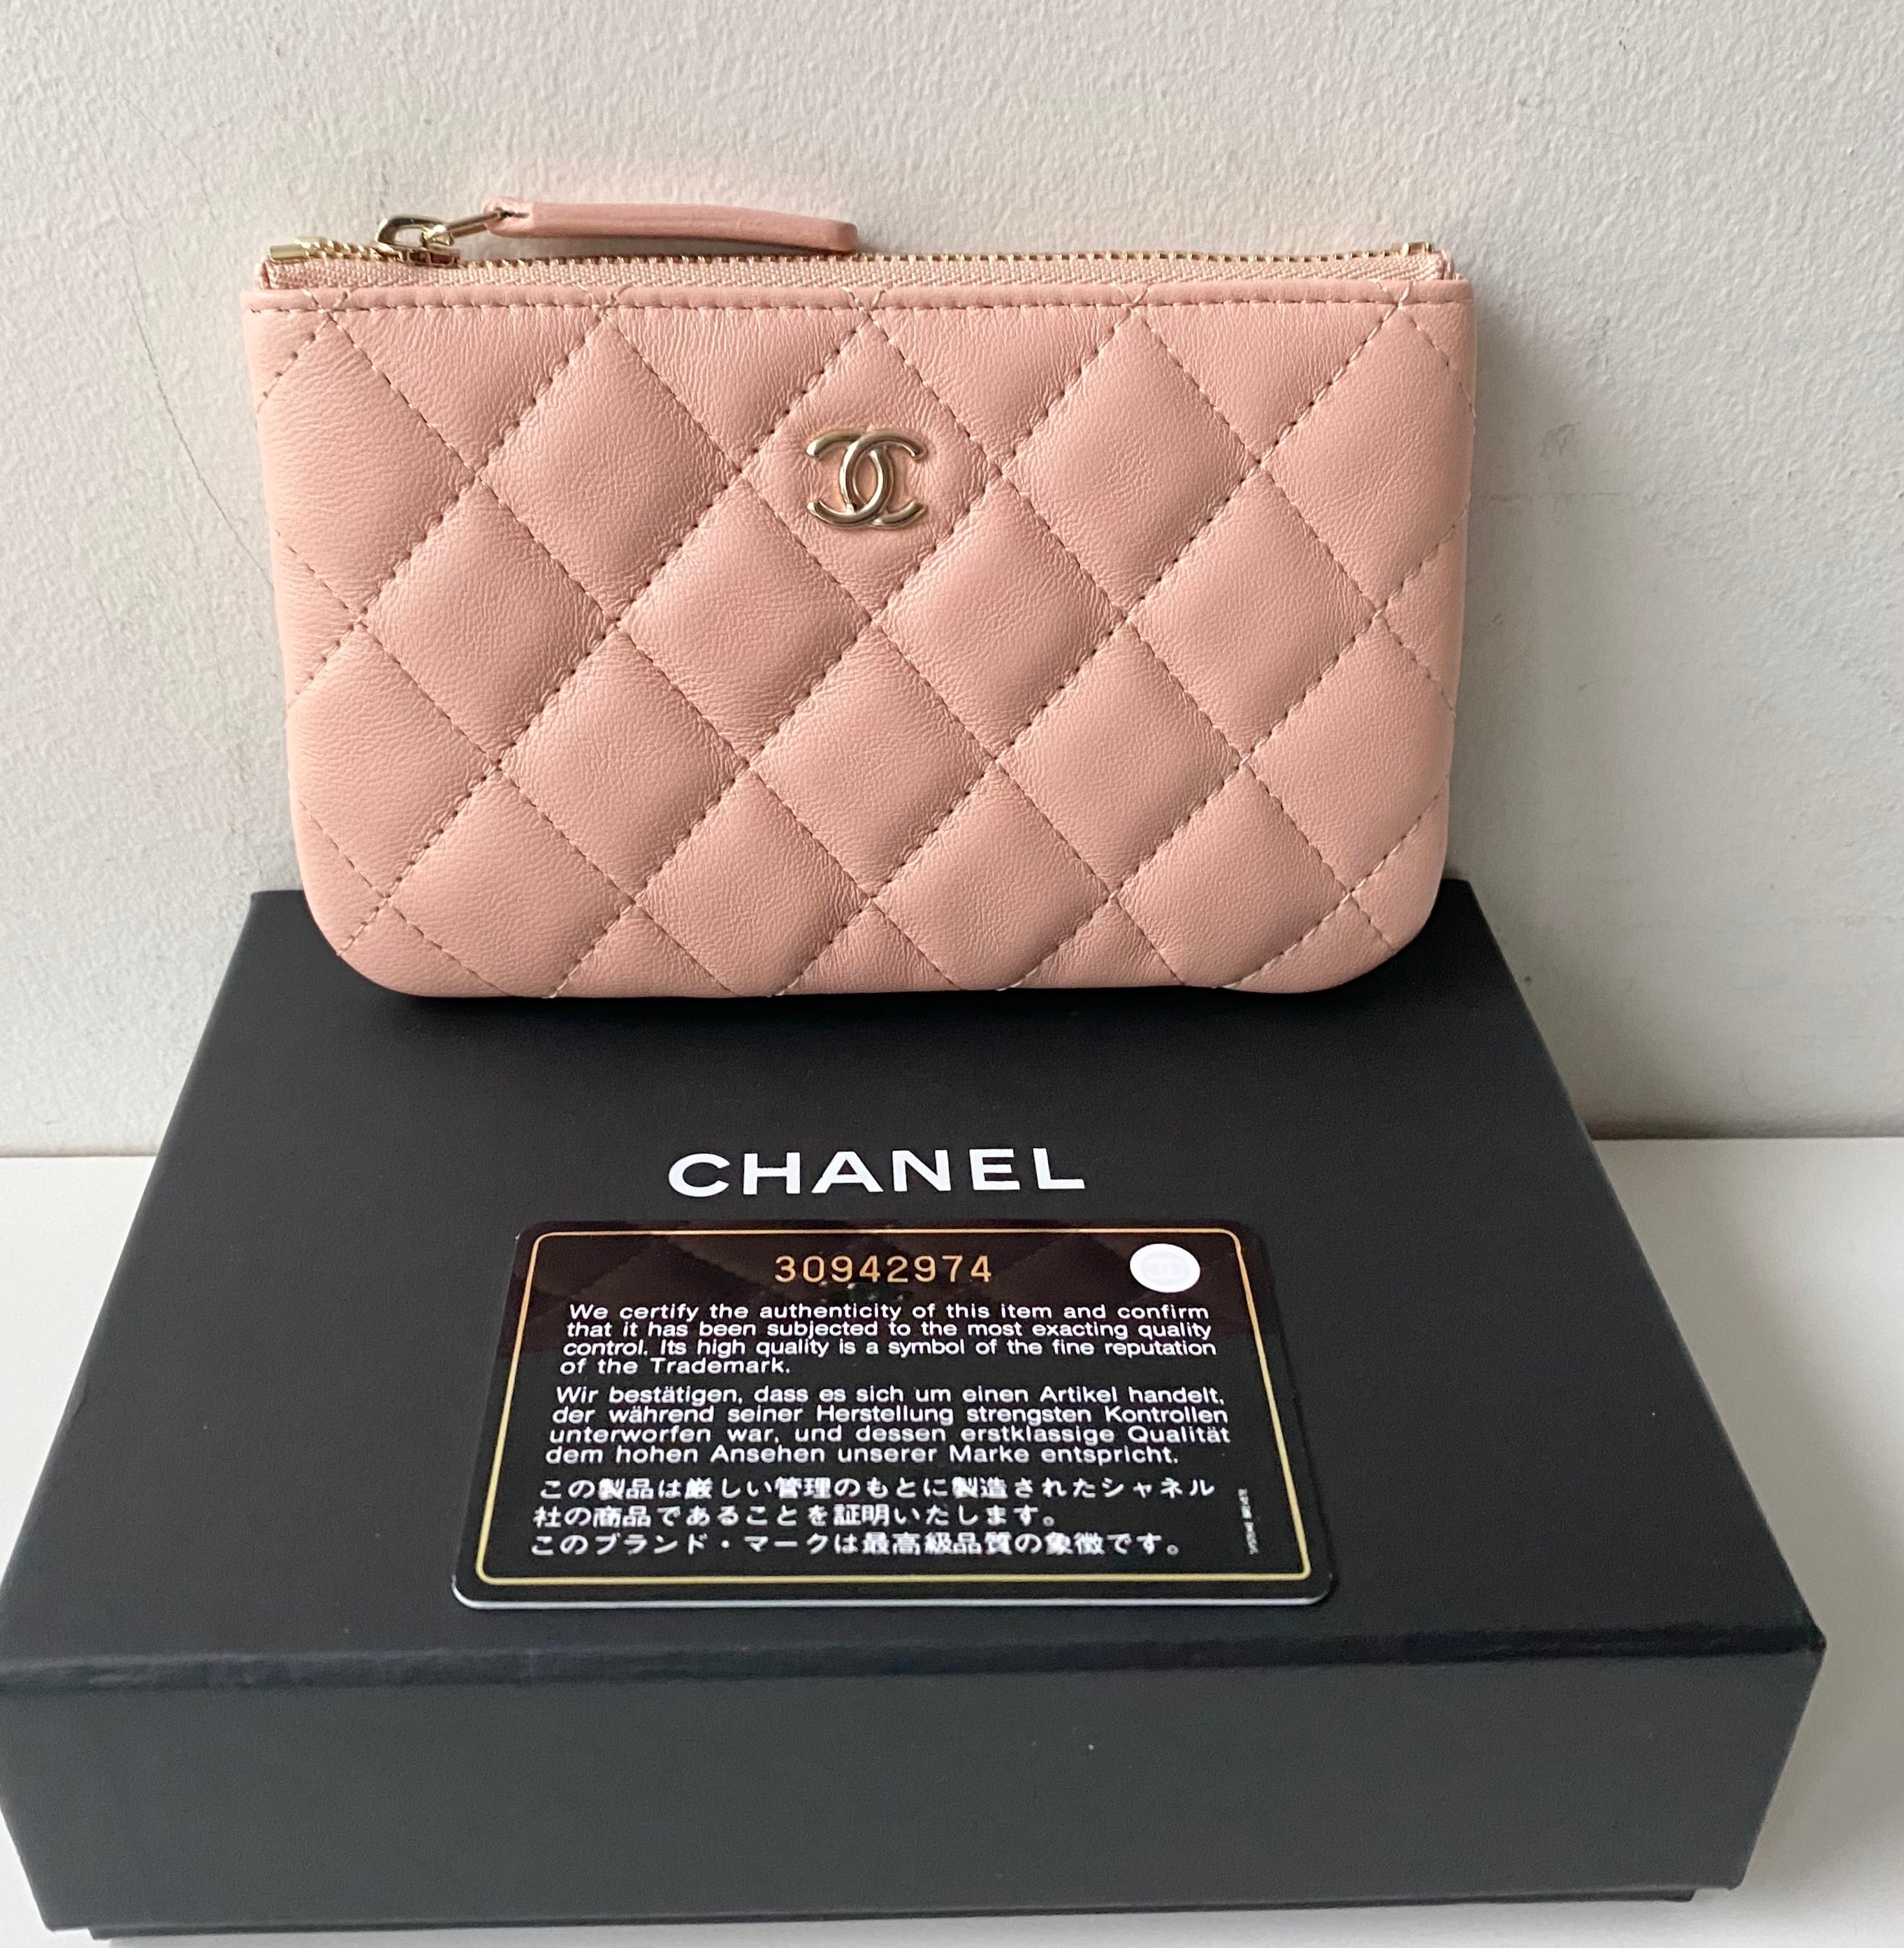 Chanel Mini O-Case: Review, How to Use It, and a What to look out for -  *WATCH BEFORE BUYING!* 